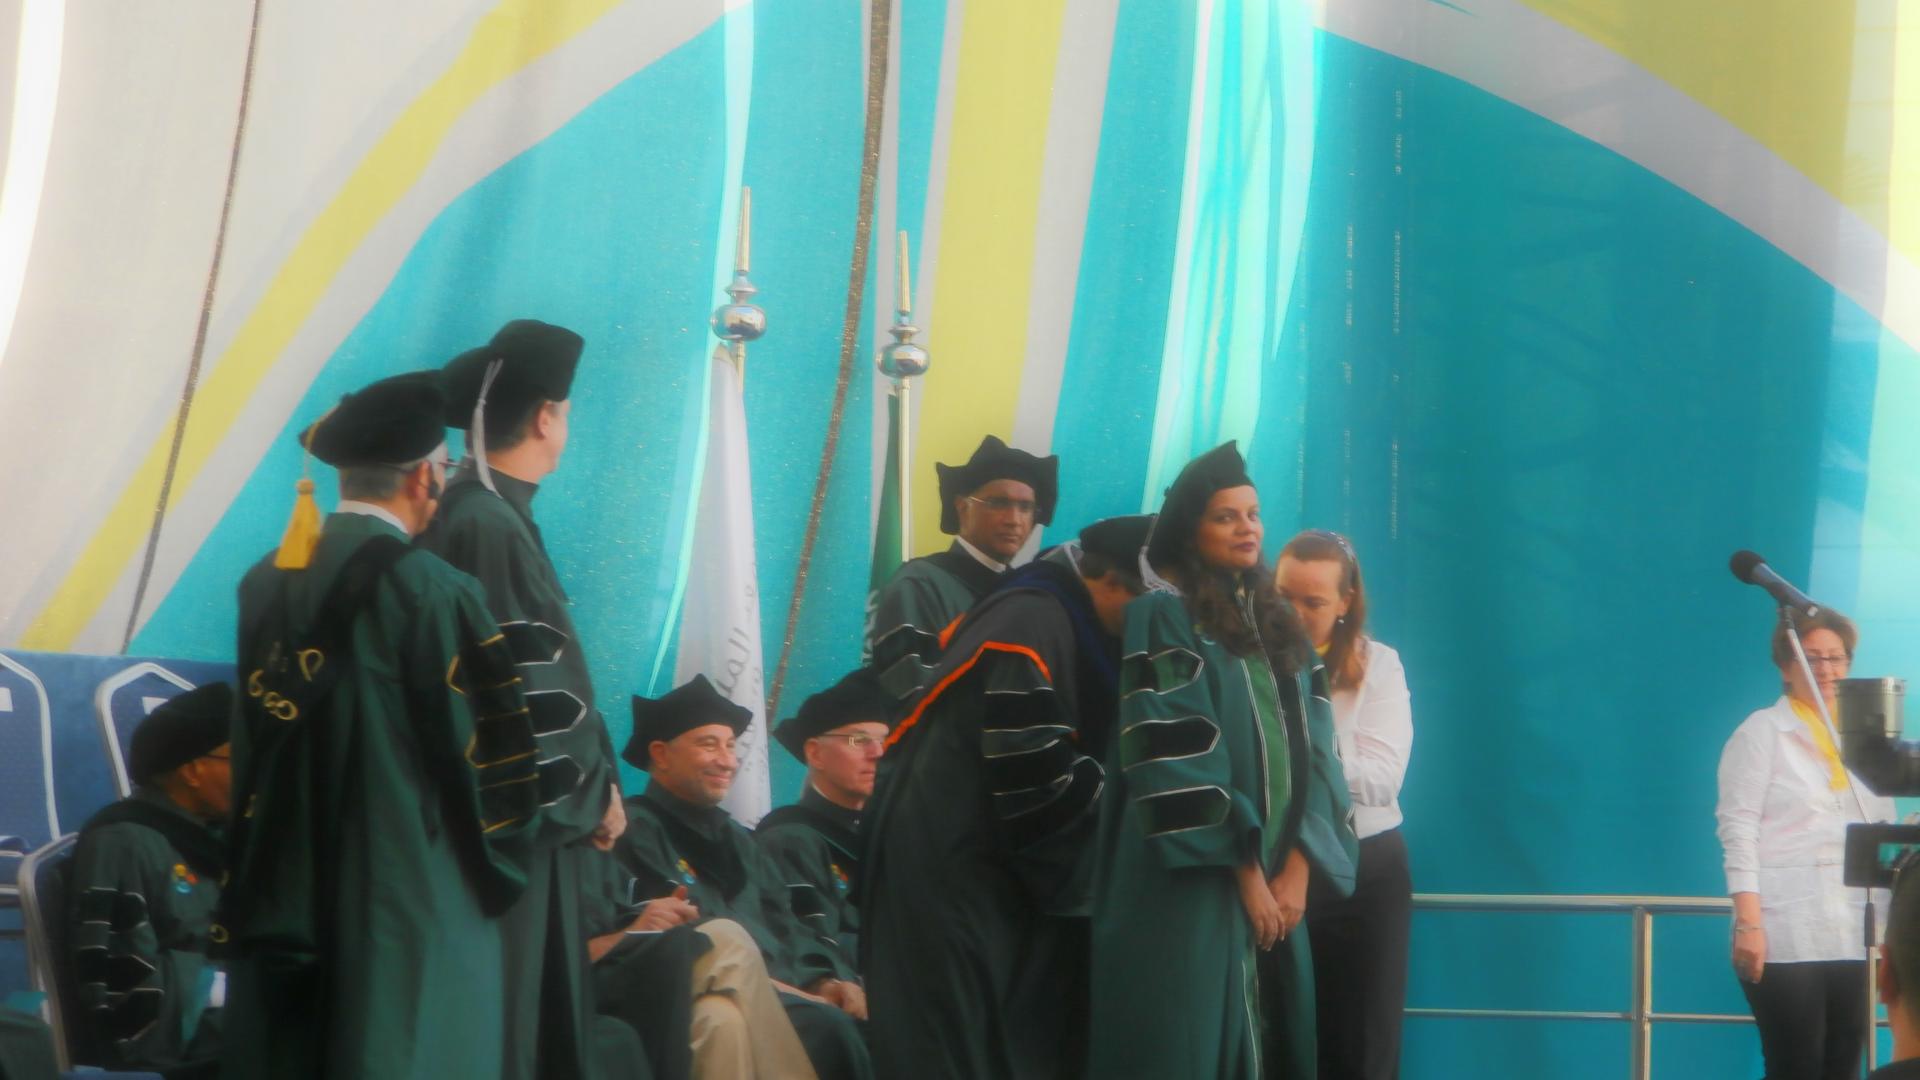 Hina Tabassum Being Awarded The Doctoral Hood By Professor Mohamed-Slim Alouini On Her Graduation